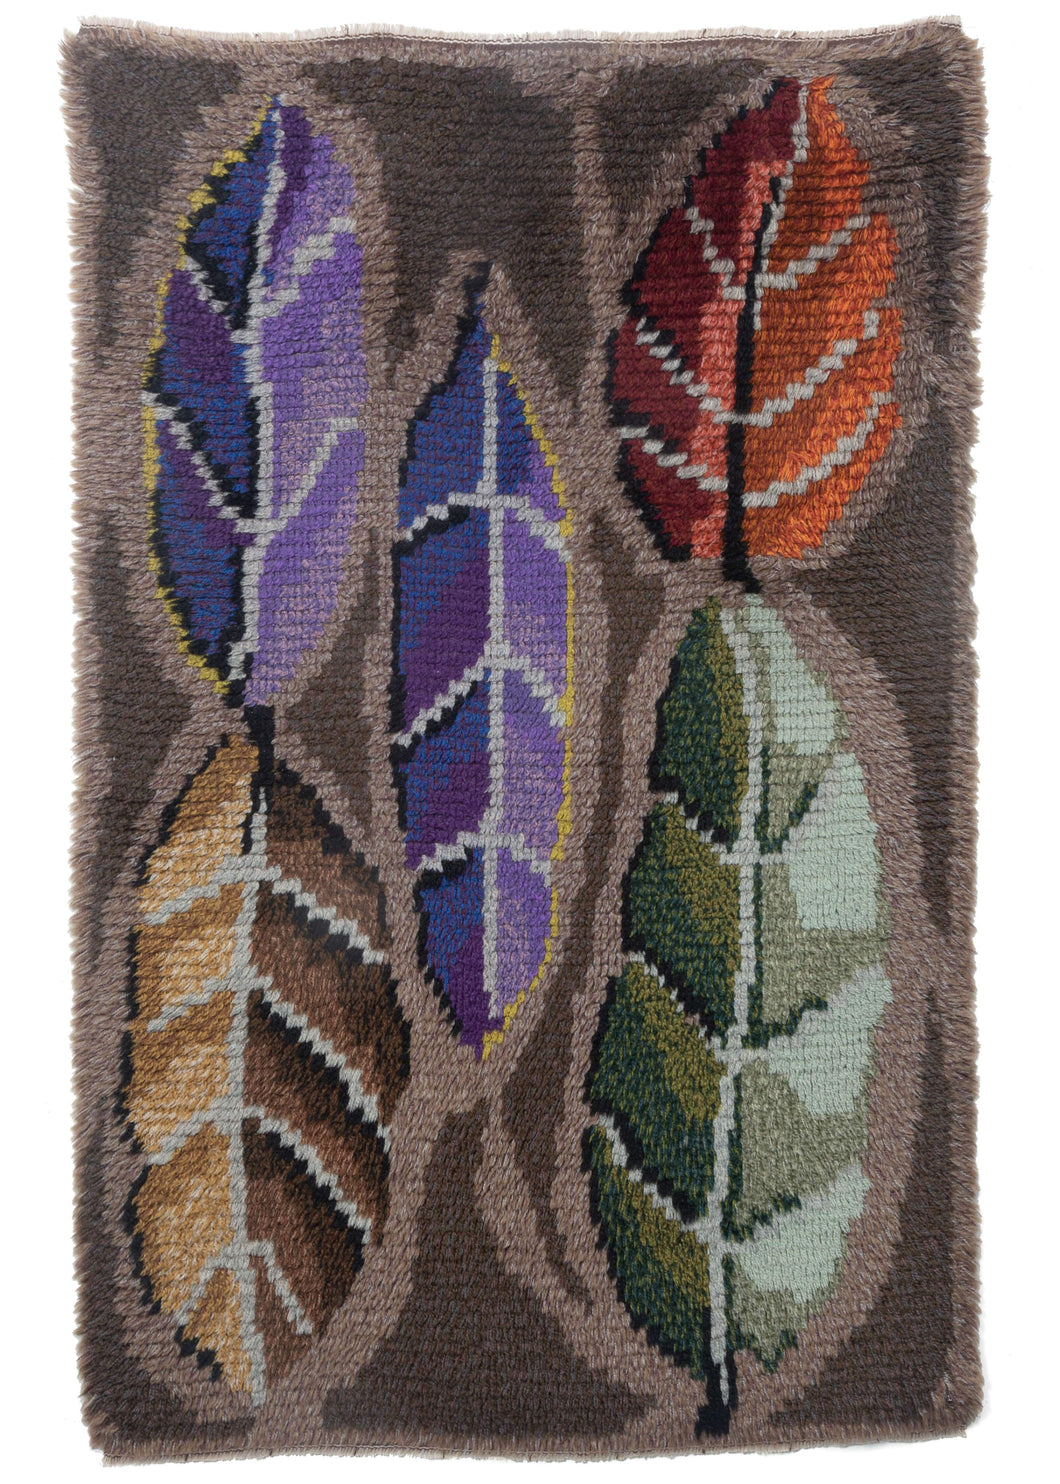 Mid Century handwoven Swedish rya ryya rug which has the handle of a blanket and the design of 5 colorful leaves on a taupe field